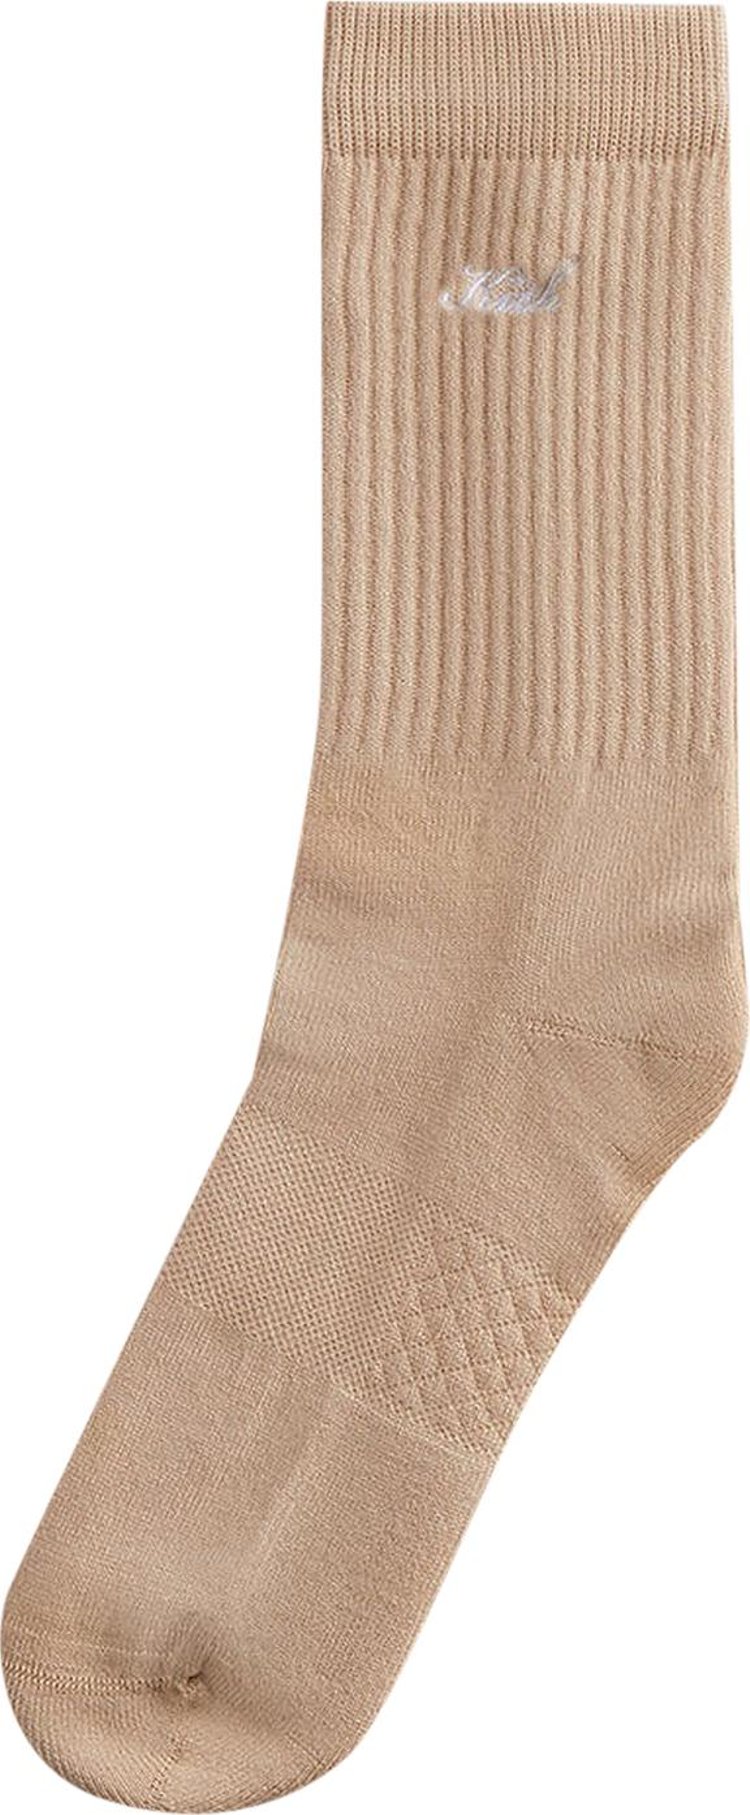 Kith For Stance Socks 'Canvas'